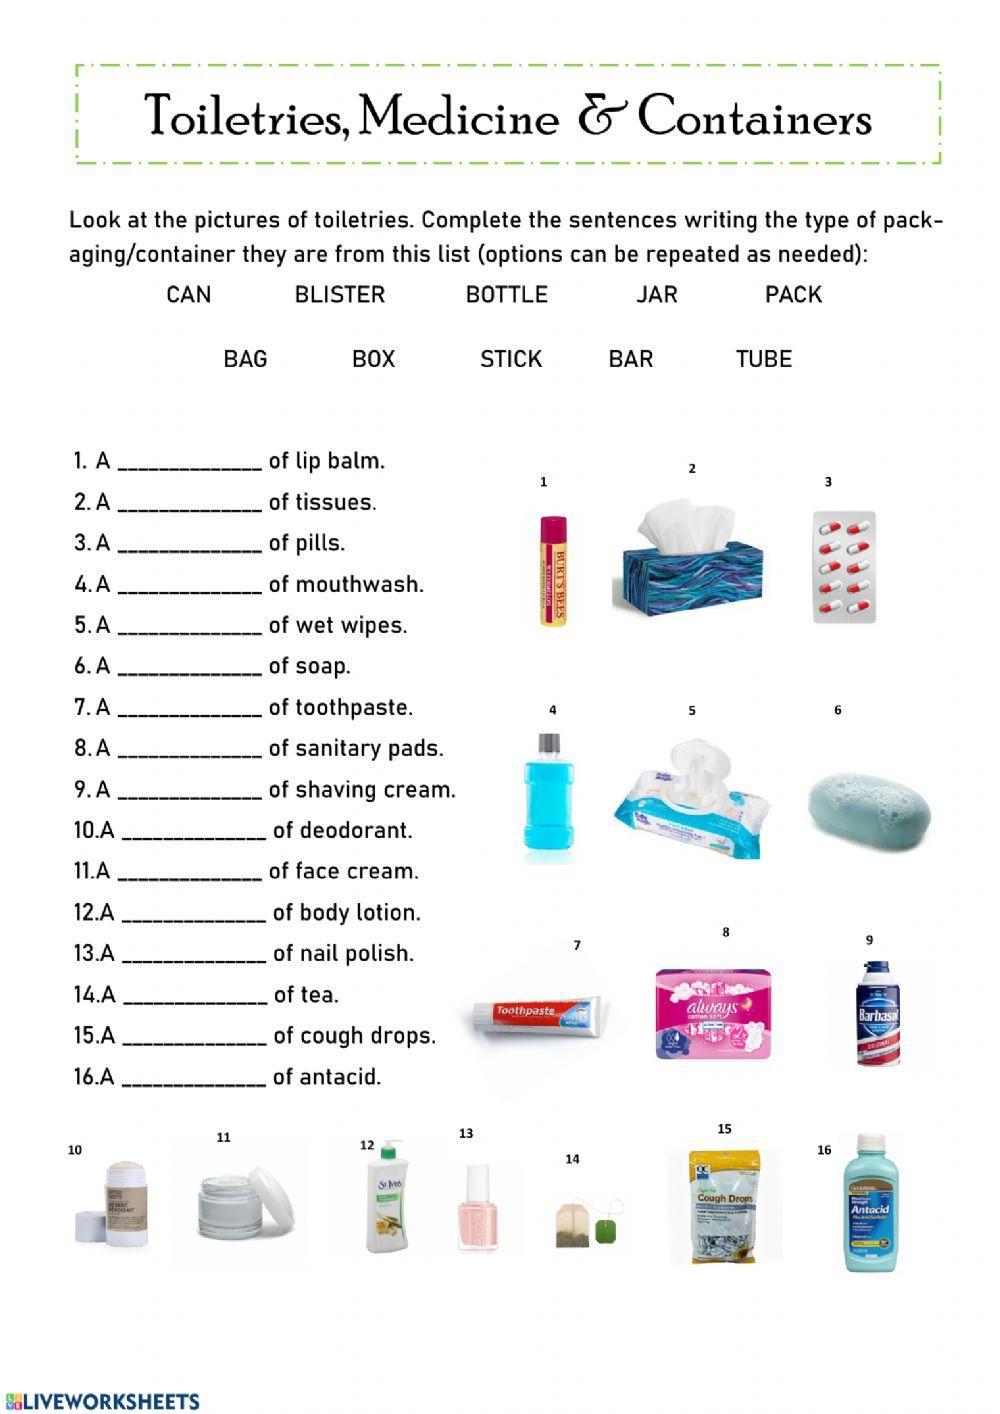 Toiletries, Medicine and Containers